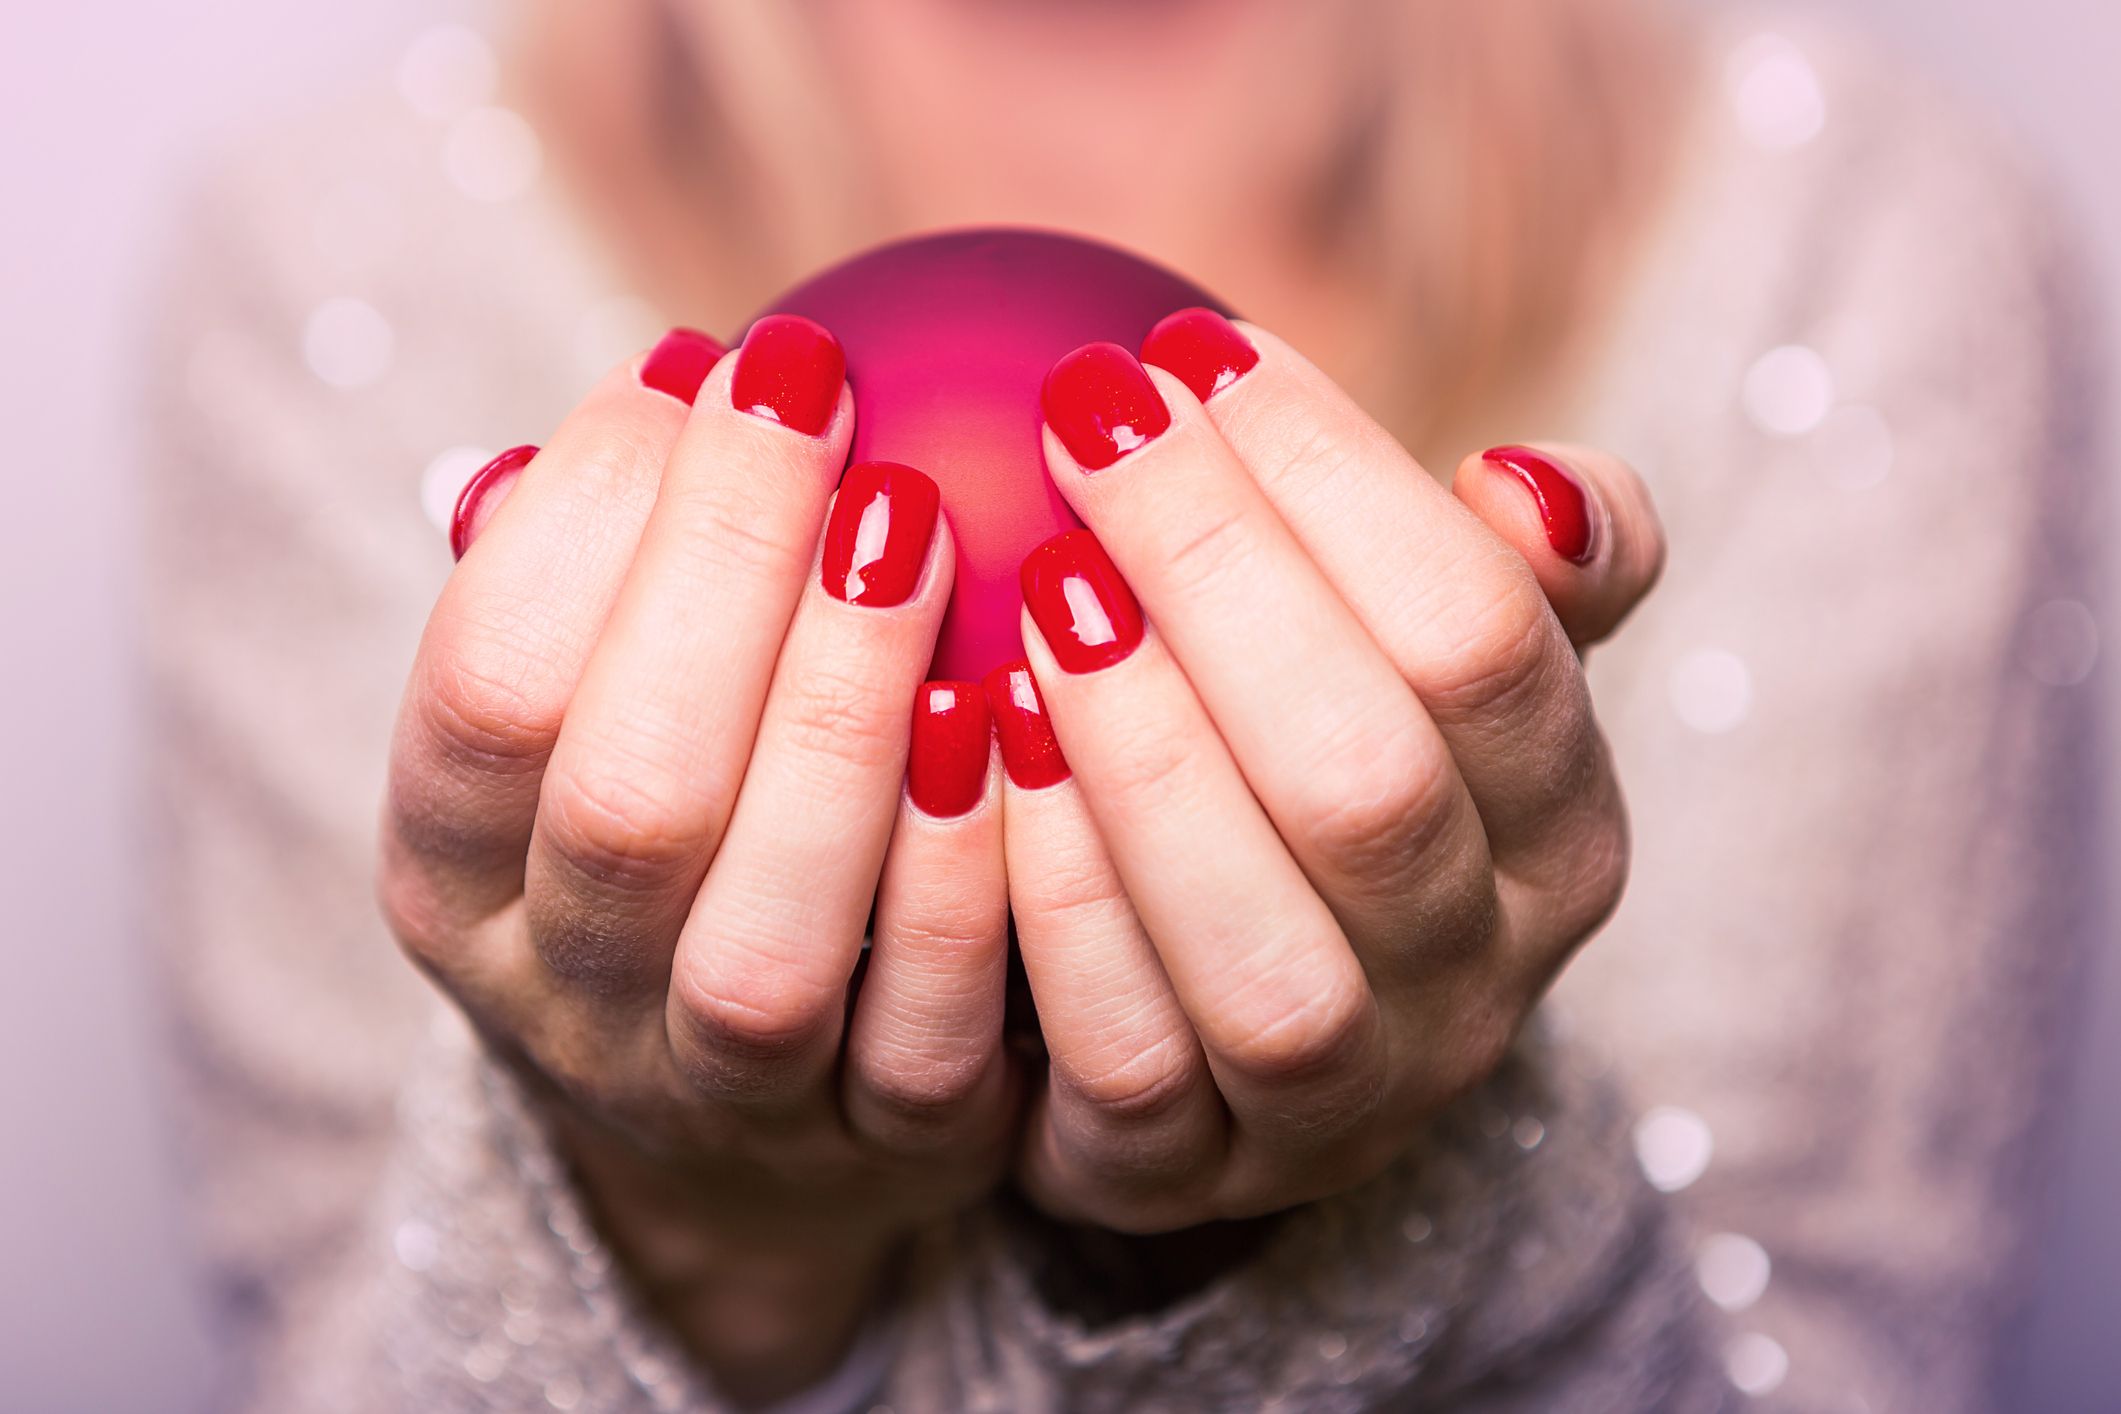 13 Best Red Nail Polish Colors - Best Red Shades For Nails 2022